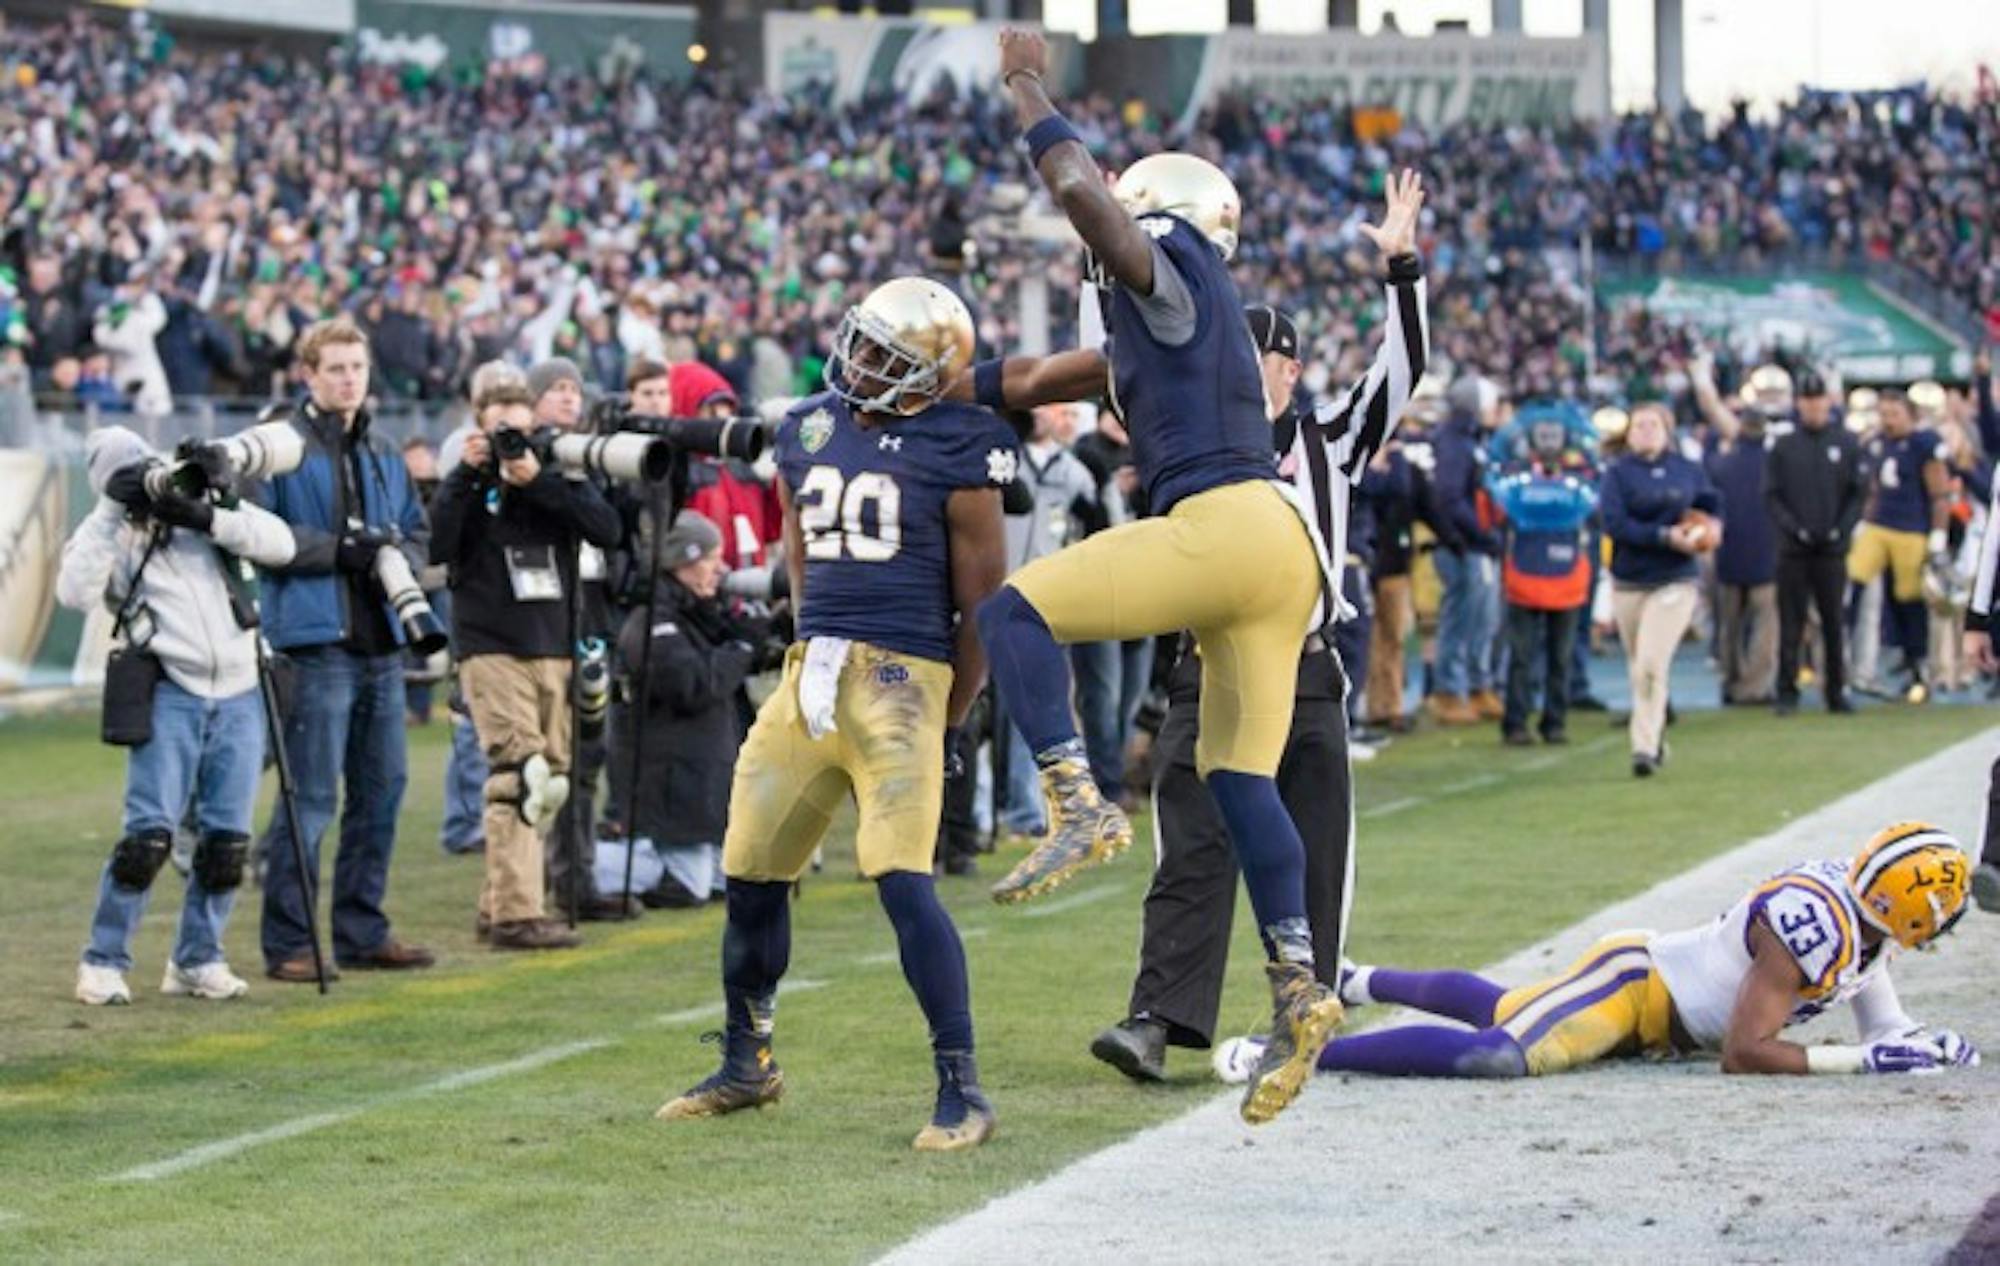 Senior C.J. Prosise celebrates his 50-yard touchdown rush during Notre Dame’s 31-28 win over LSU on Dec. 30 in the Music City Bowl.